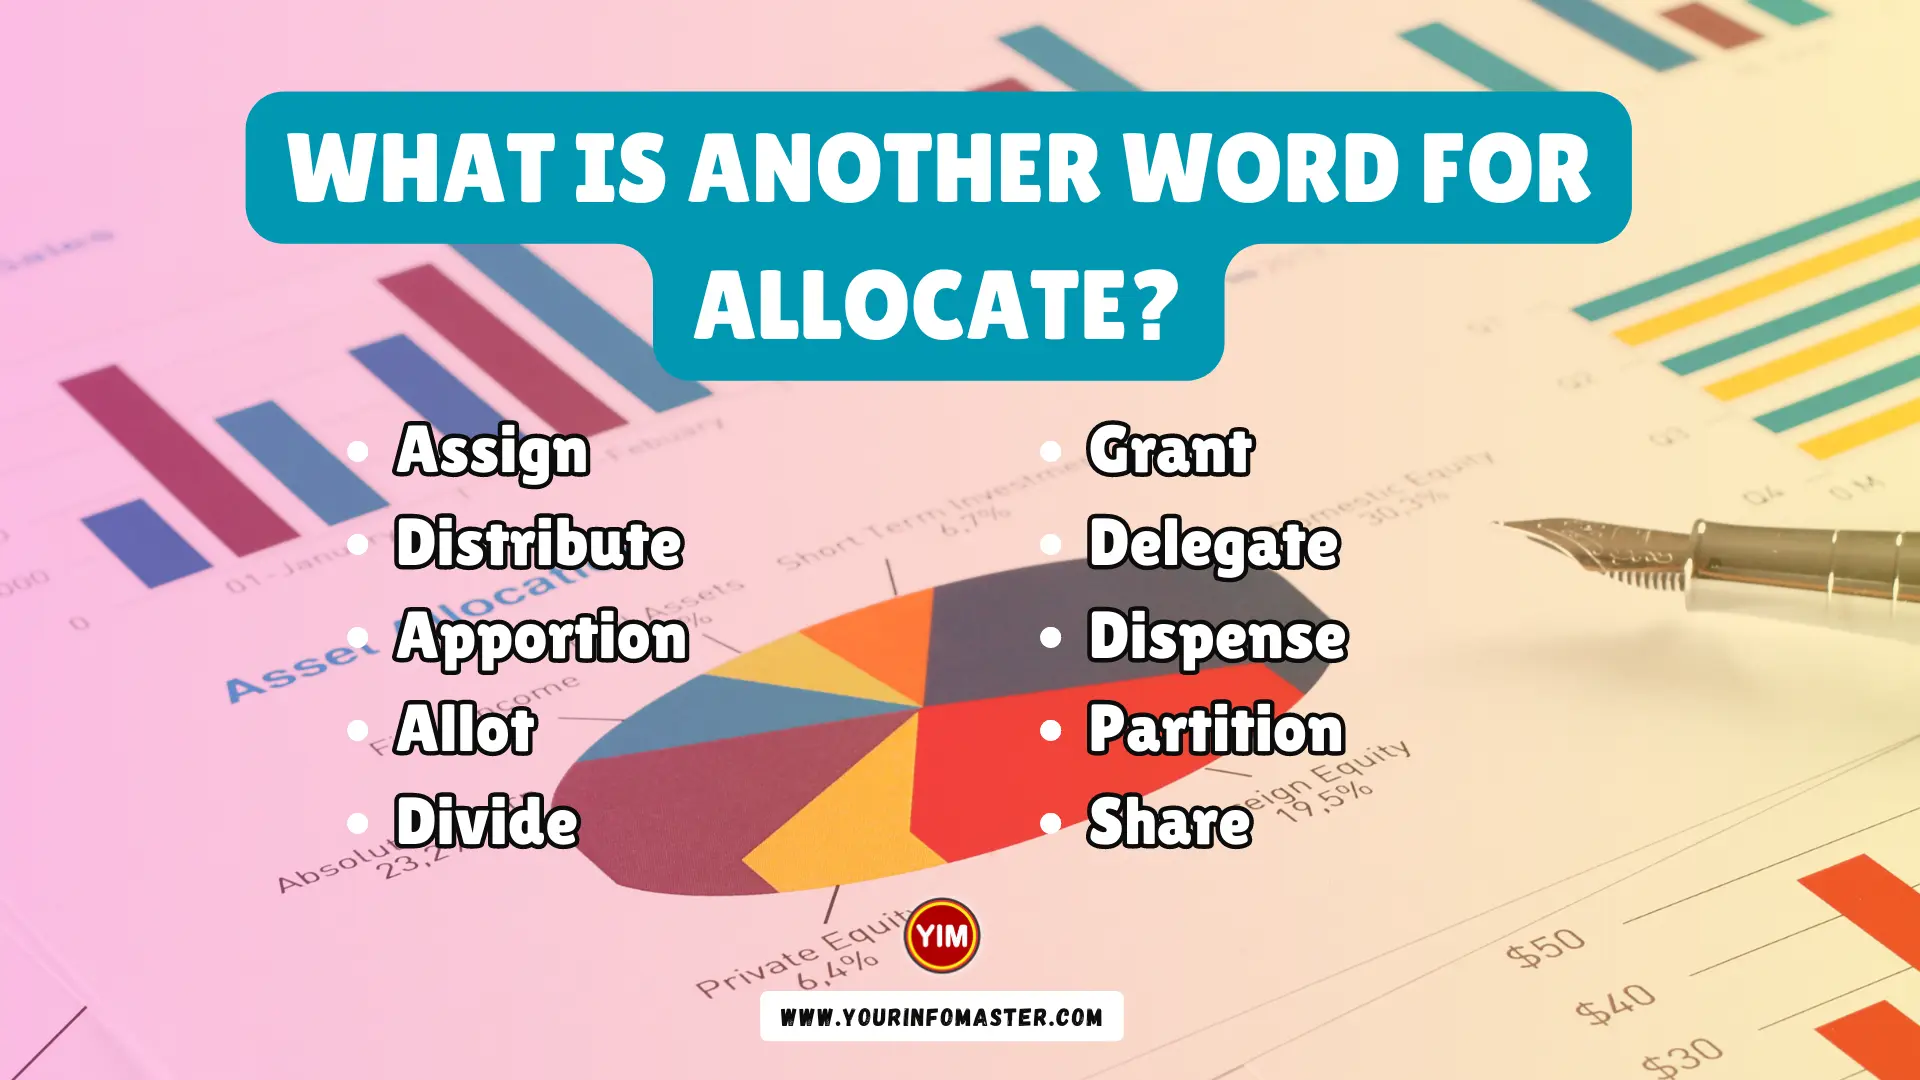 What is another word for Allocate